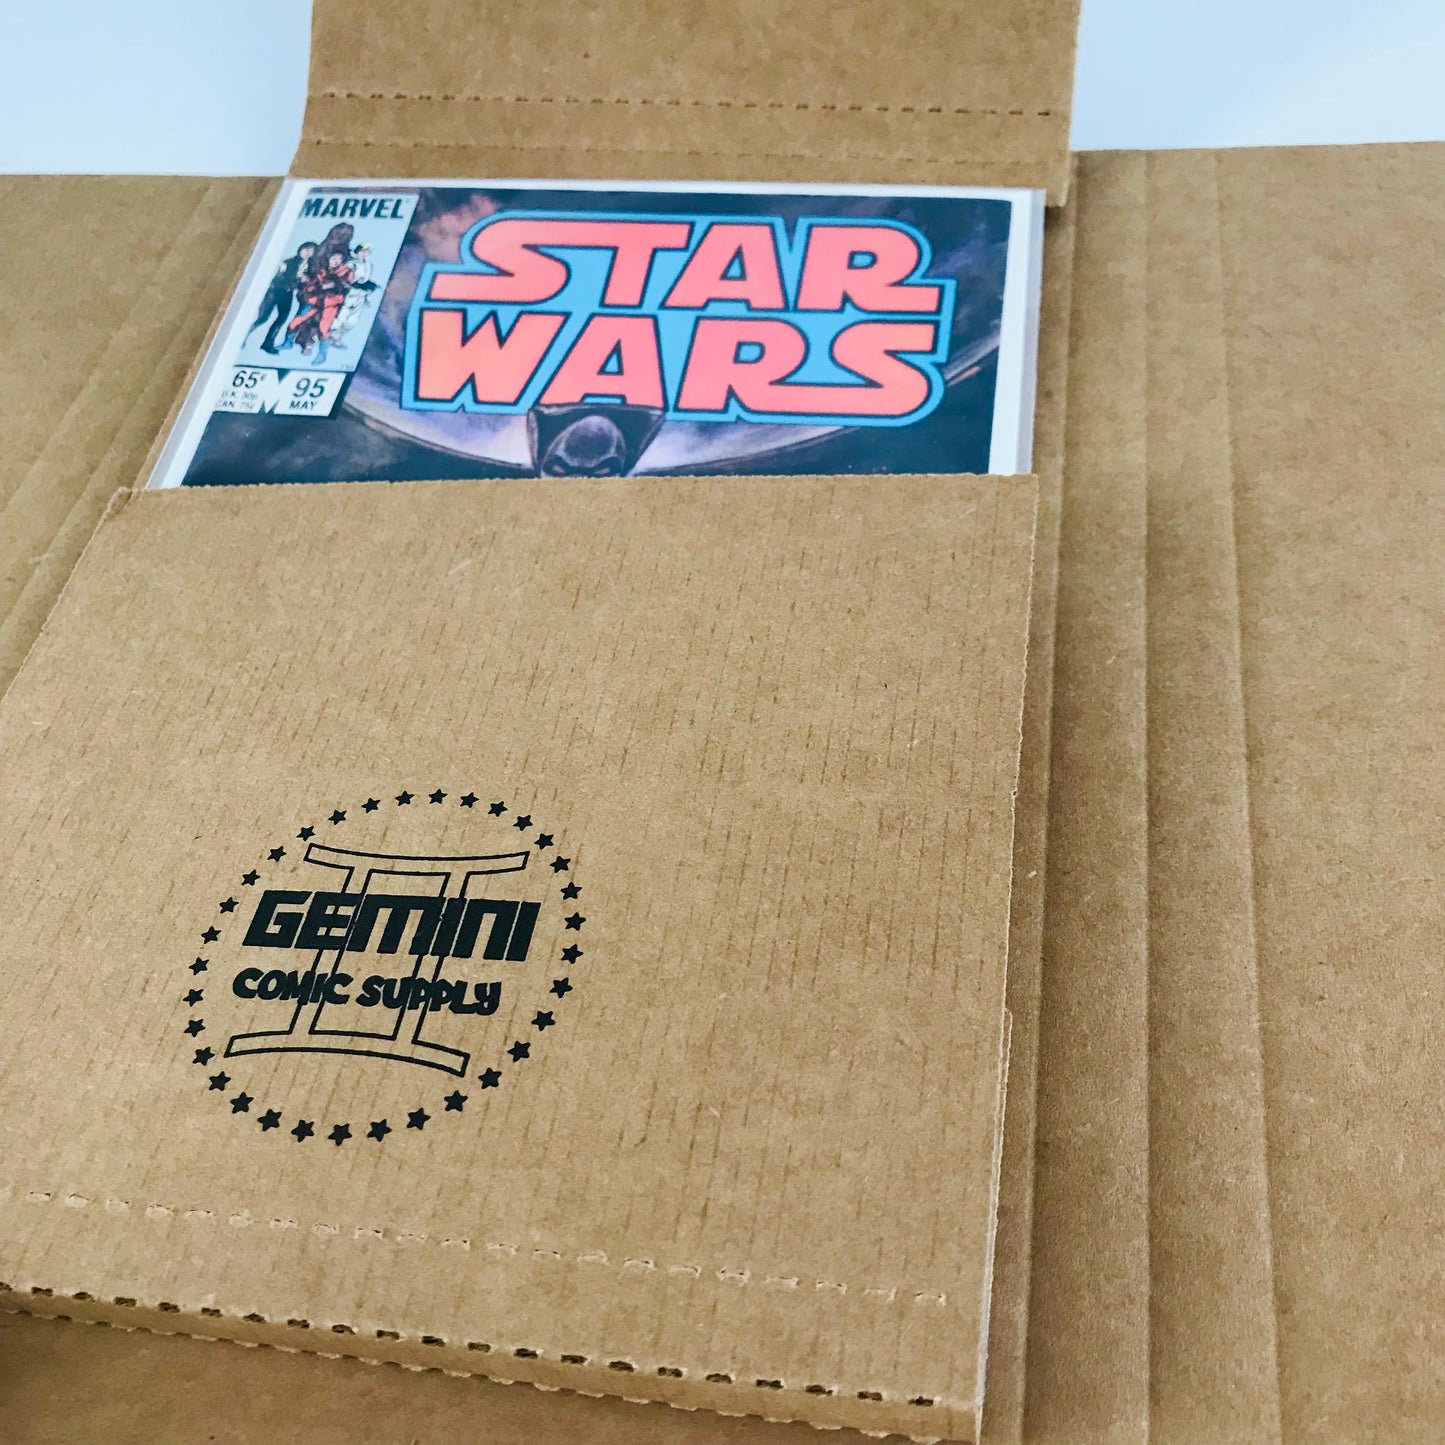 An image showing a vintage comic book wrapped up securely in a Gemini cardboard comic book mailer.